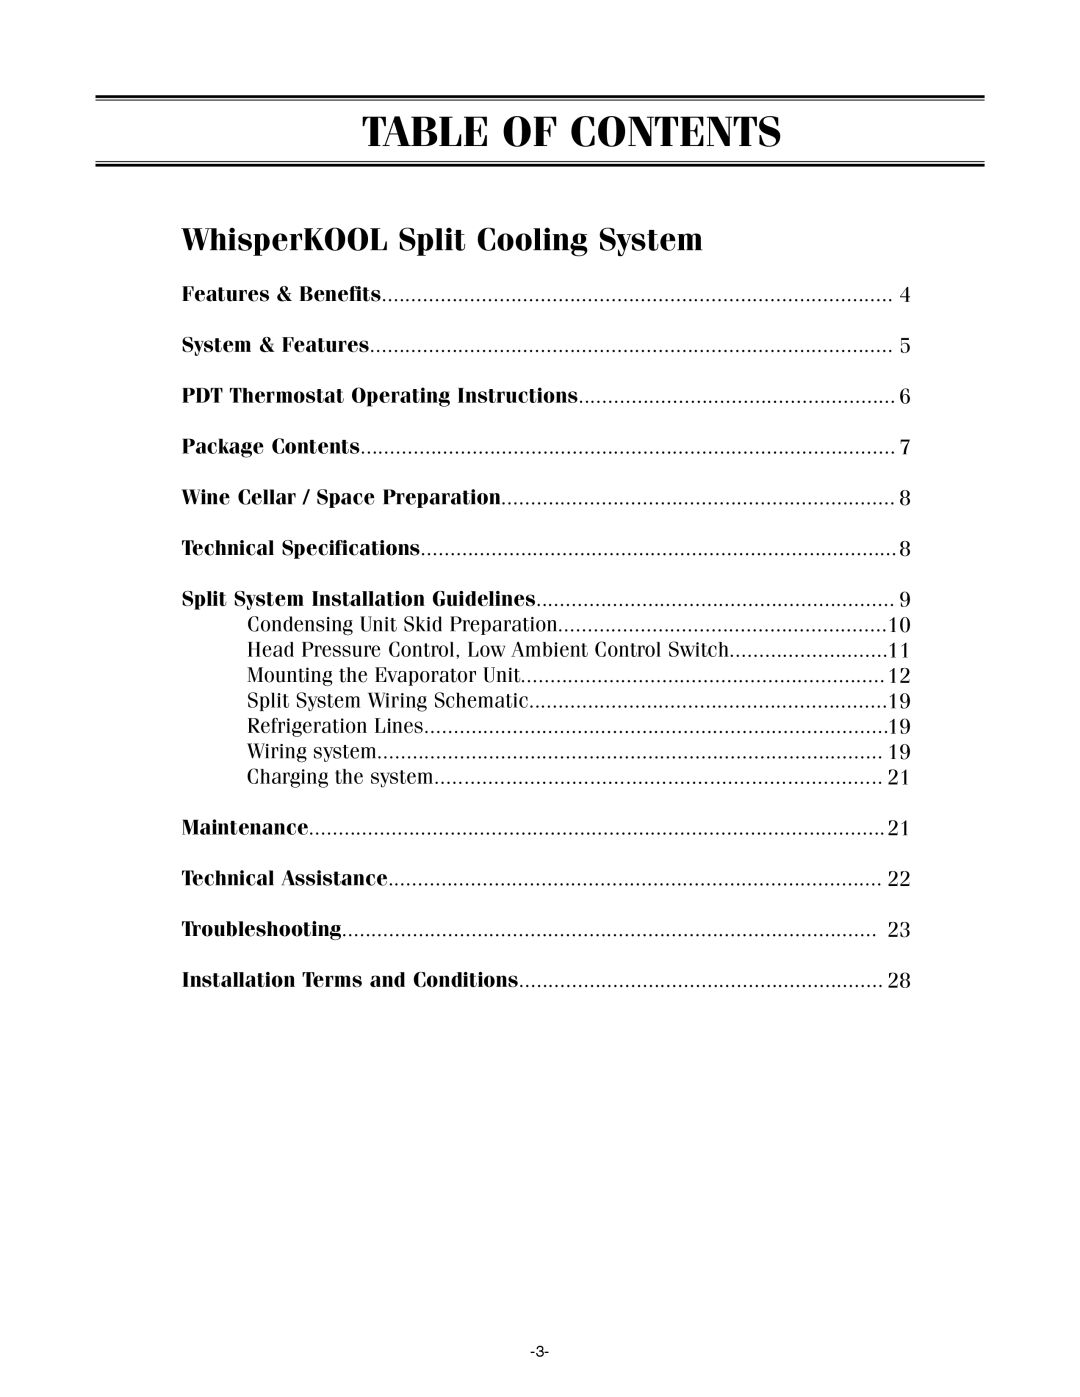 WhisperKool SS7000, SS4000 owner manual Table Of Contents, WhisperKOOL Split Cooling System 